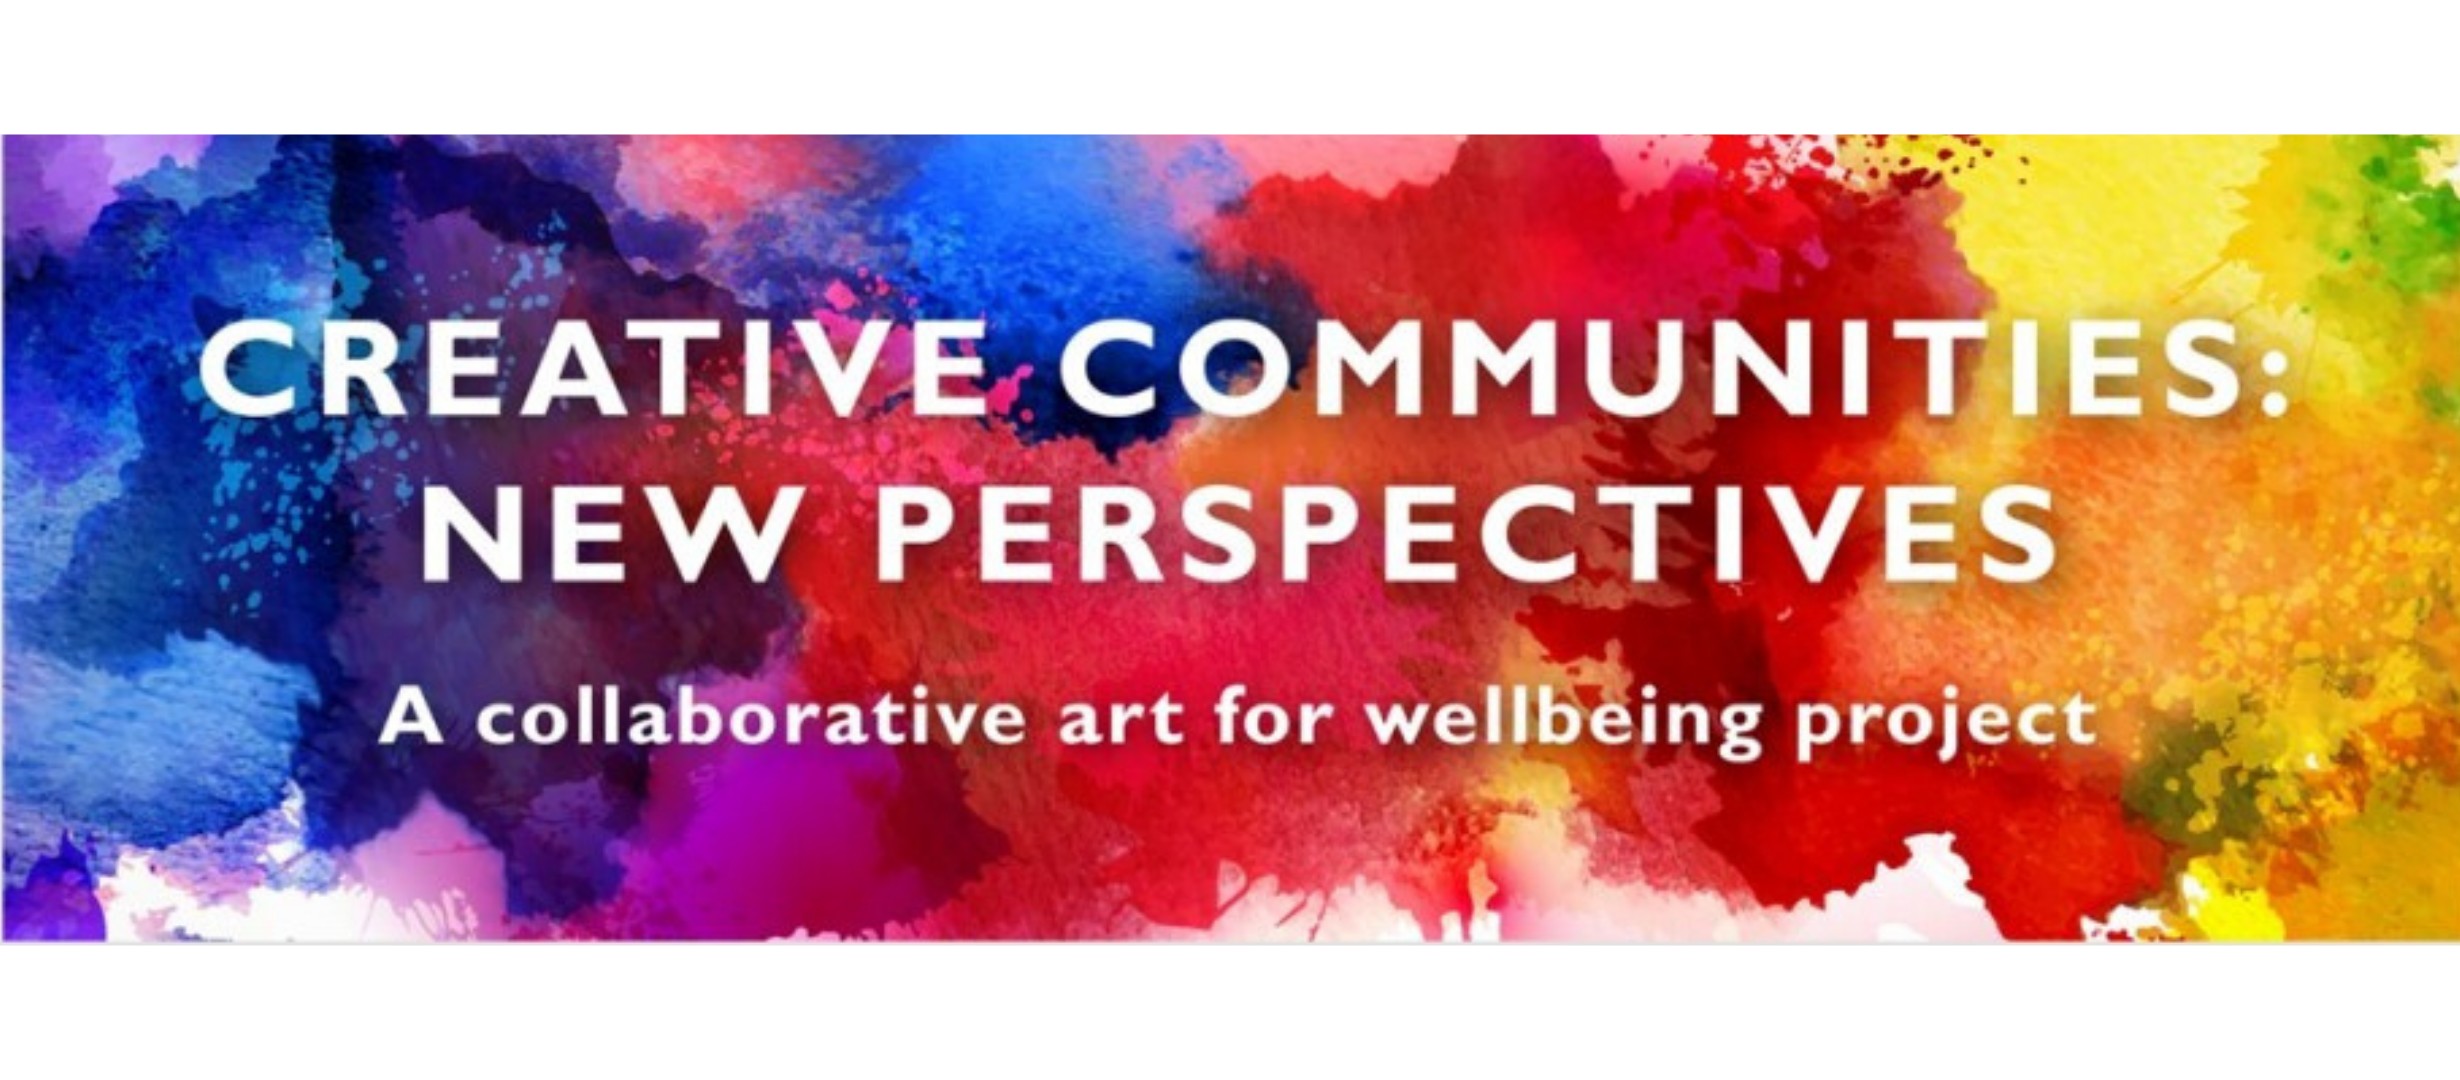 text reads 'creating communities: new perspectives. A collaborative art for wellbeing project'